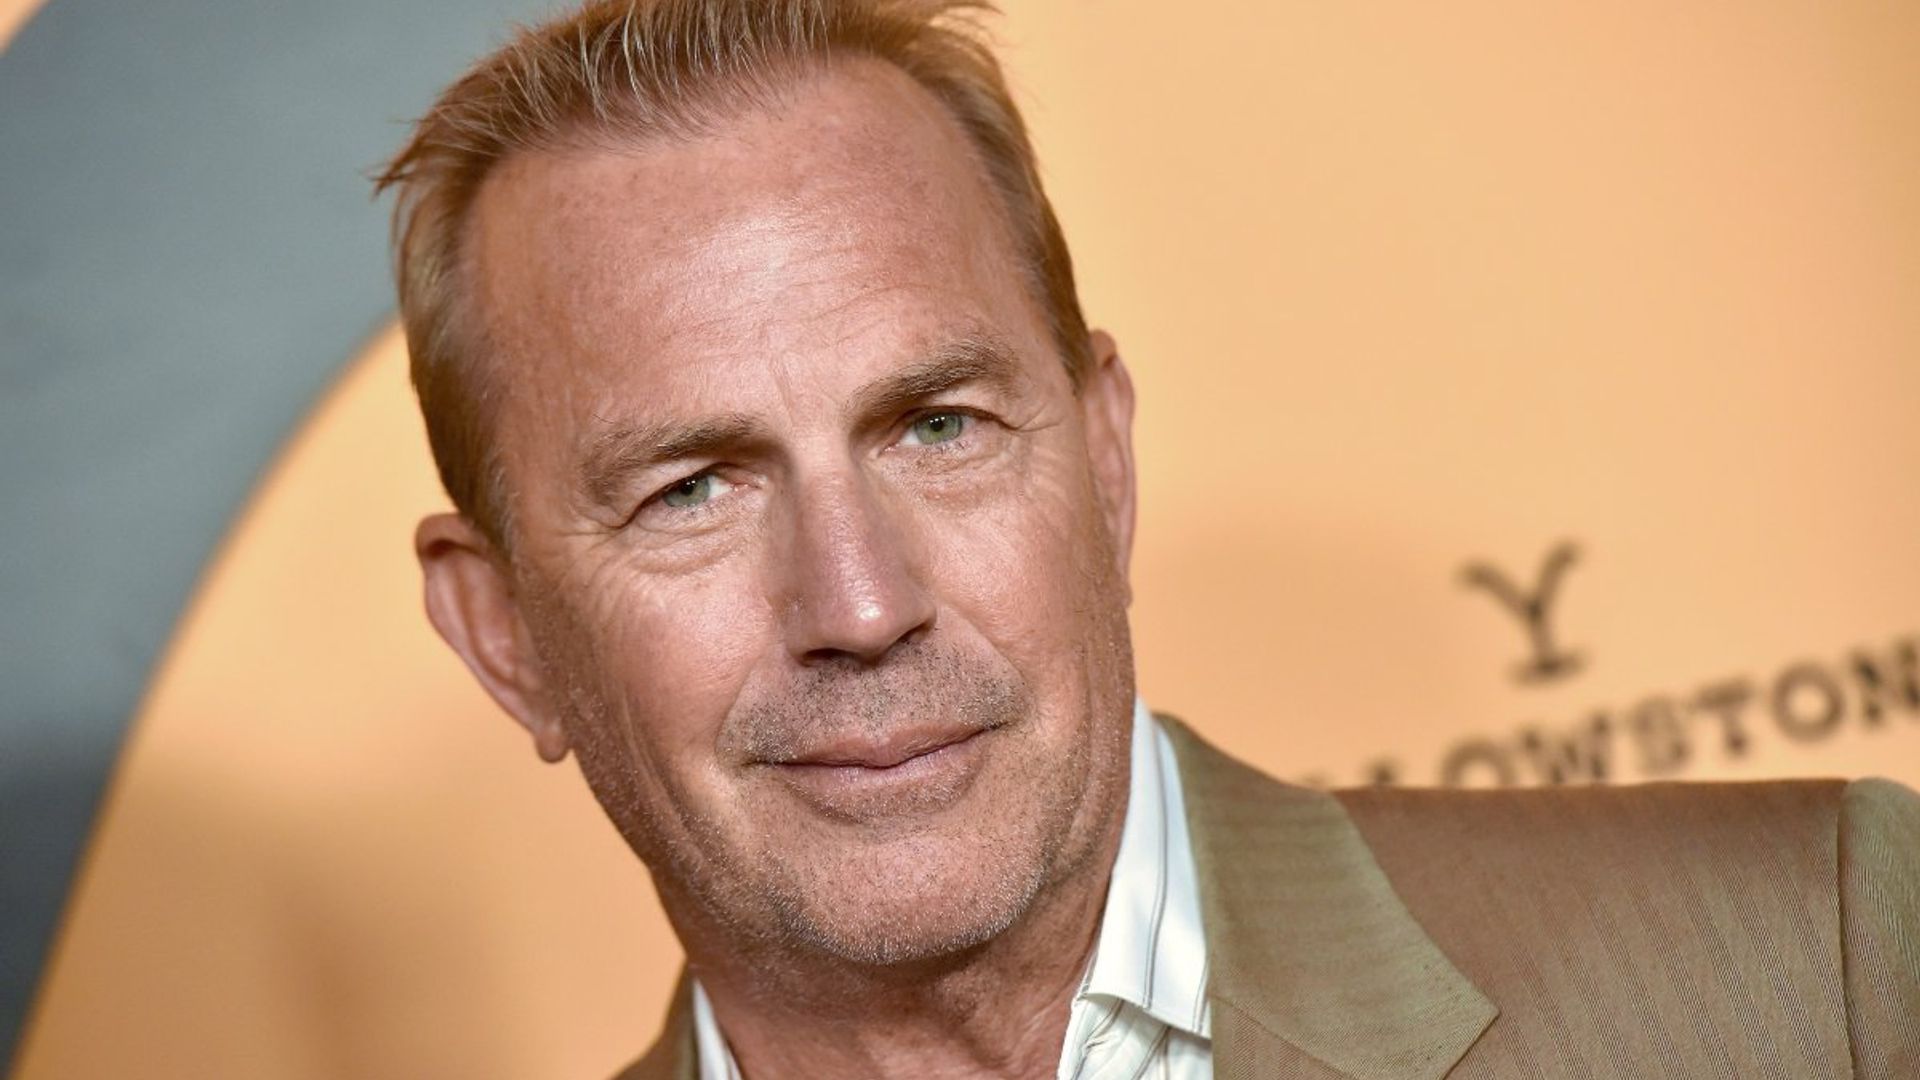 Yellowstone star Kevin Costner announces exciting reunion with former